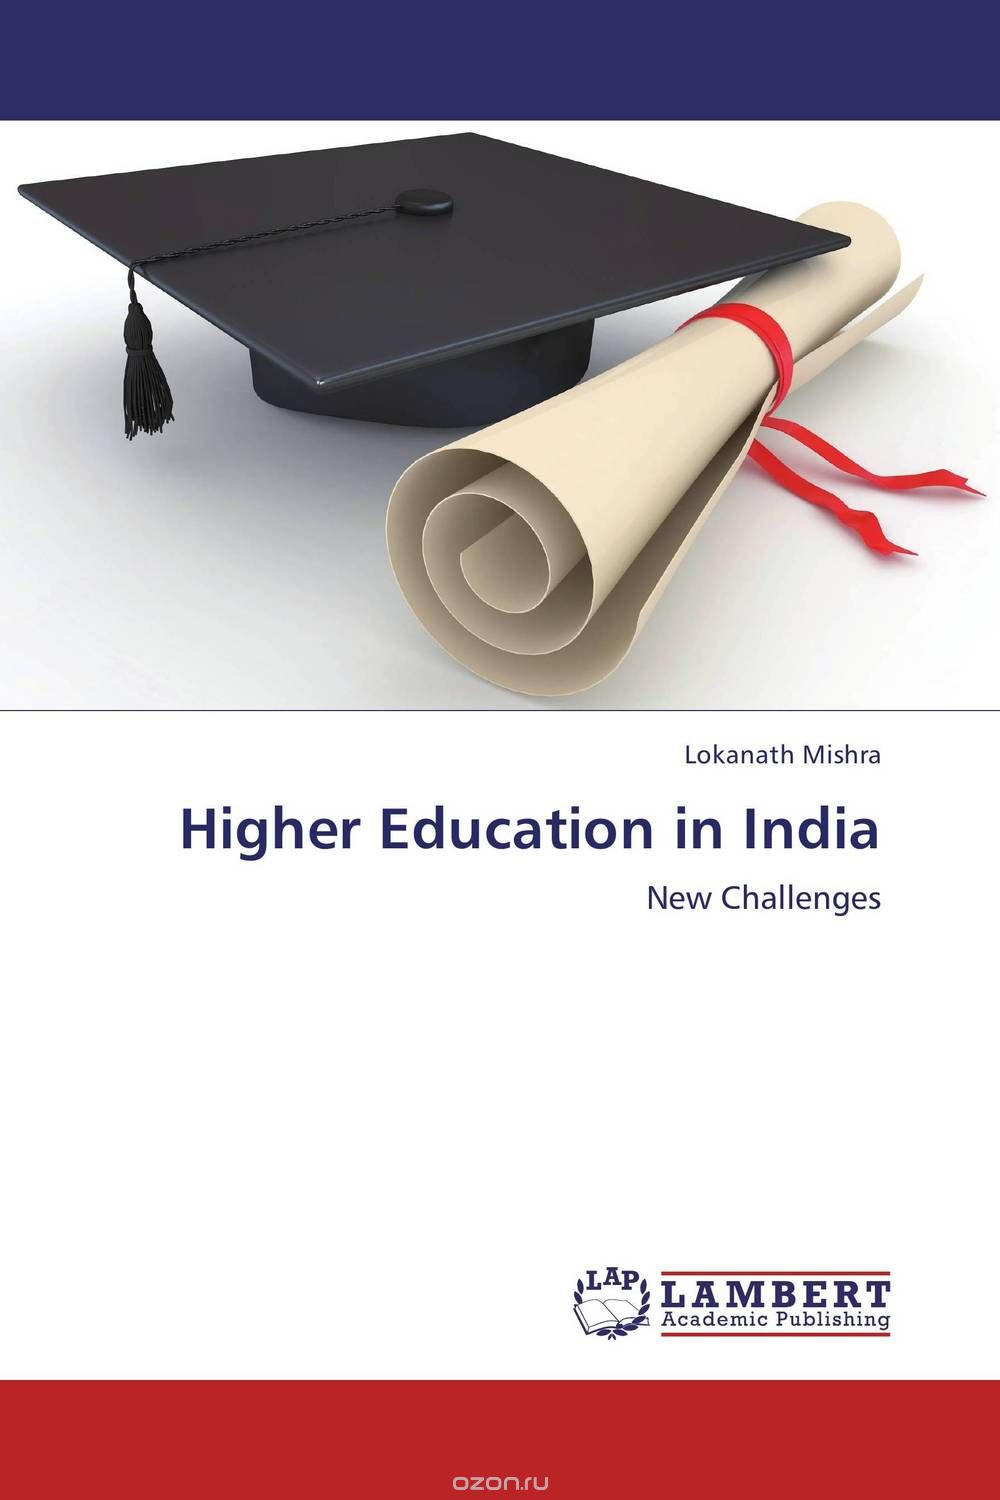 Higher Education in India